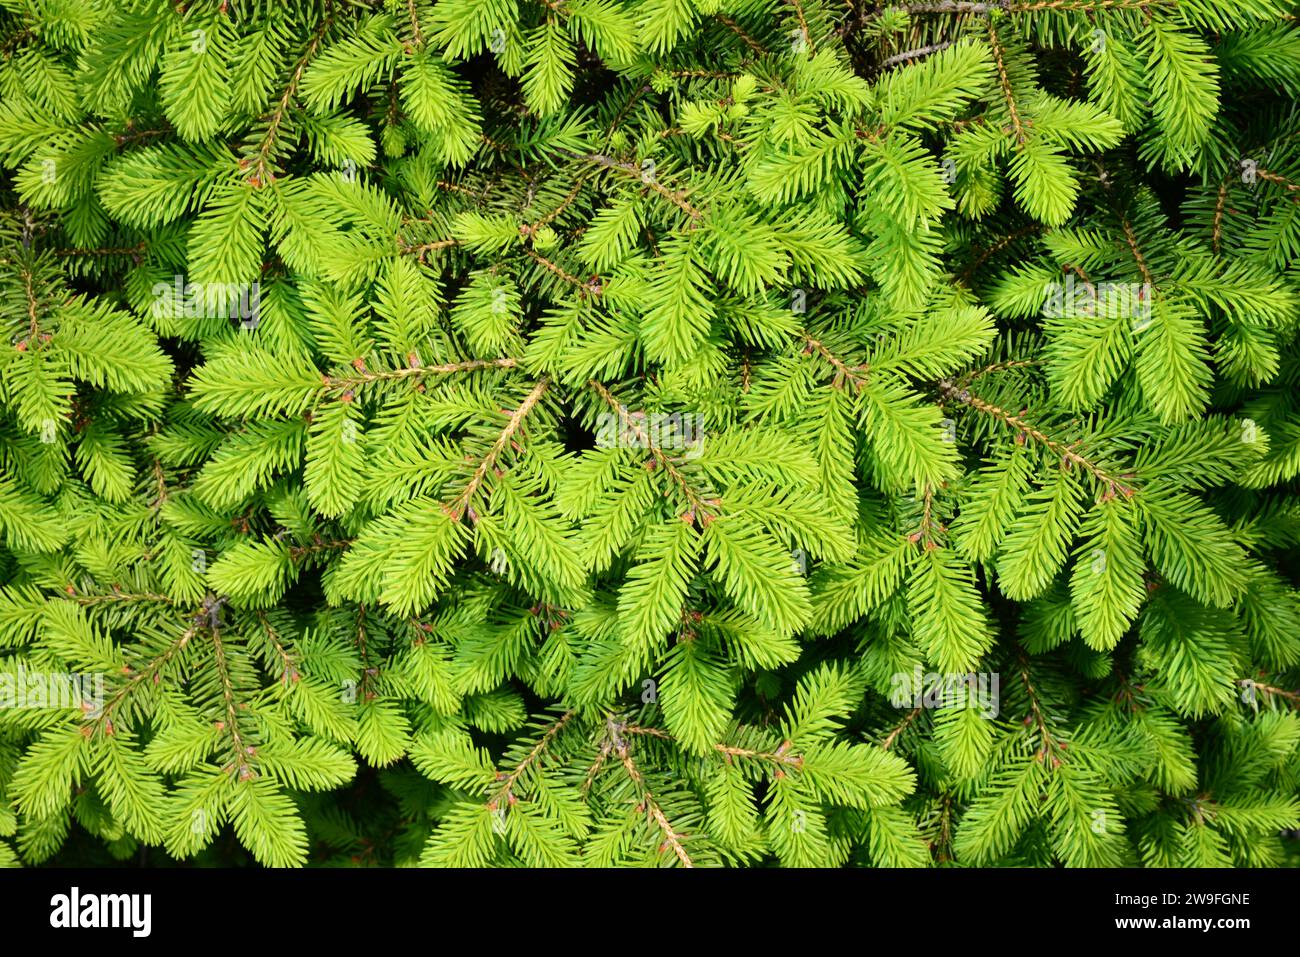 Norway spruce - Picea abies or European spruce with young shoots Stock Photo